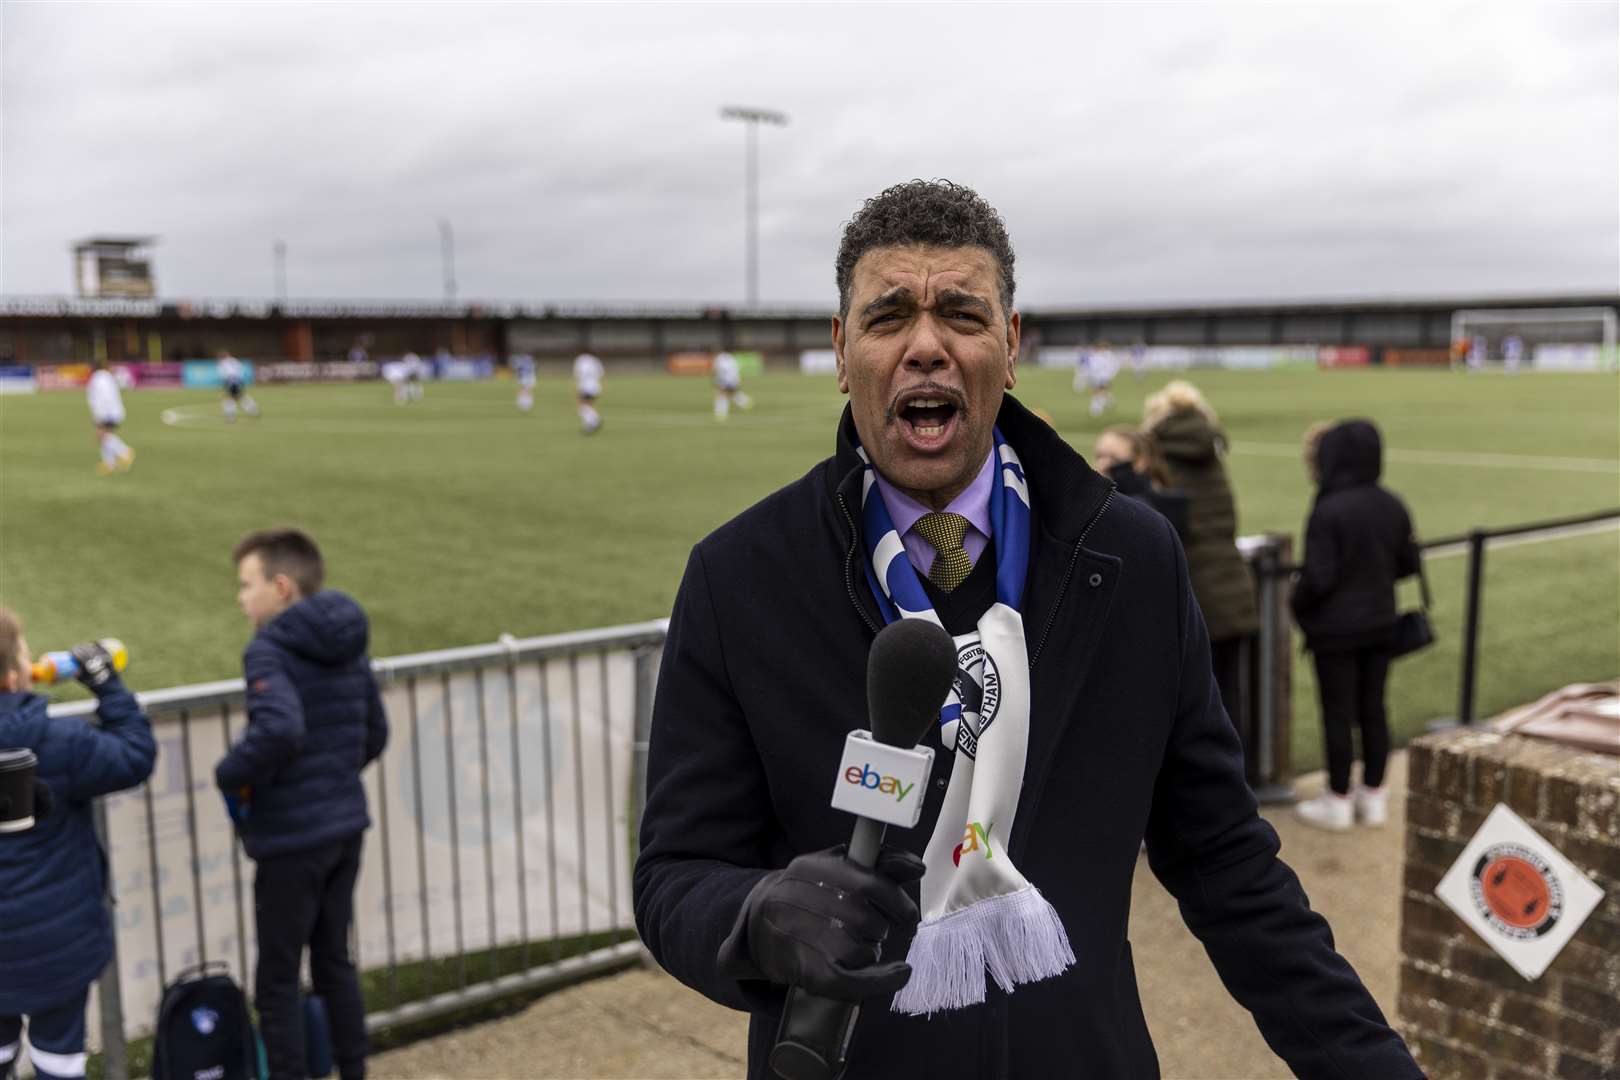 Since retiring from football, Chris Kamara has become best known for his work as a pundit and presenter on Sky Sports (Steven Paston/PA)